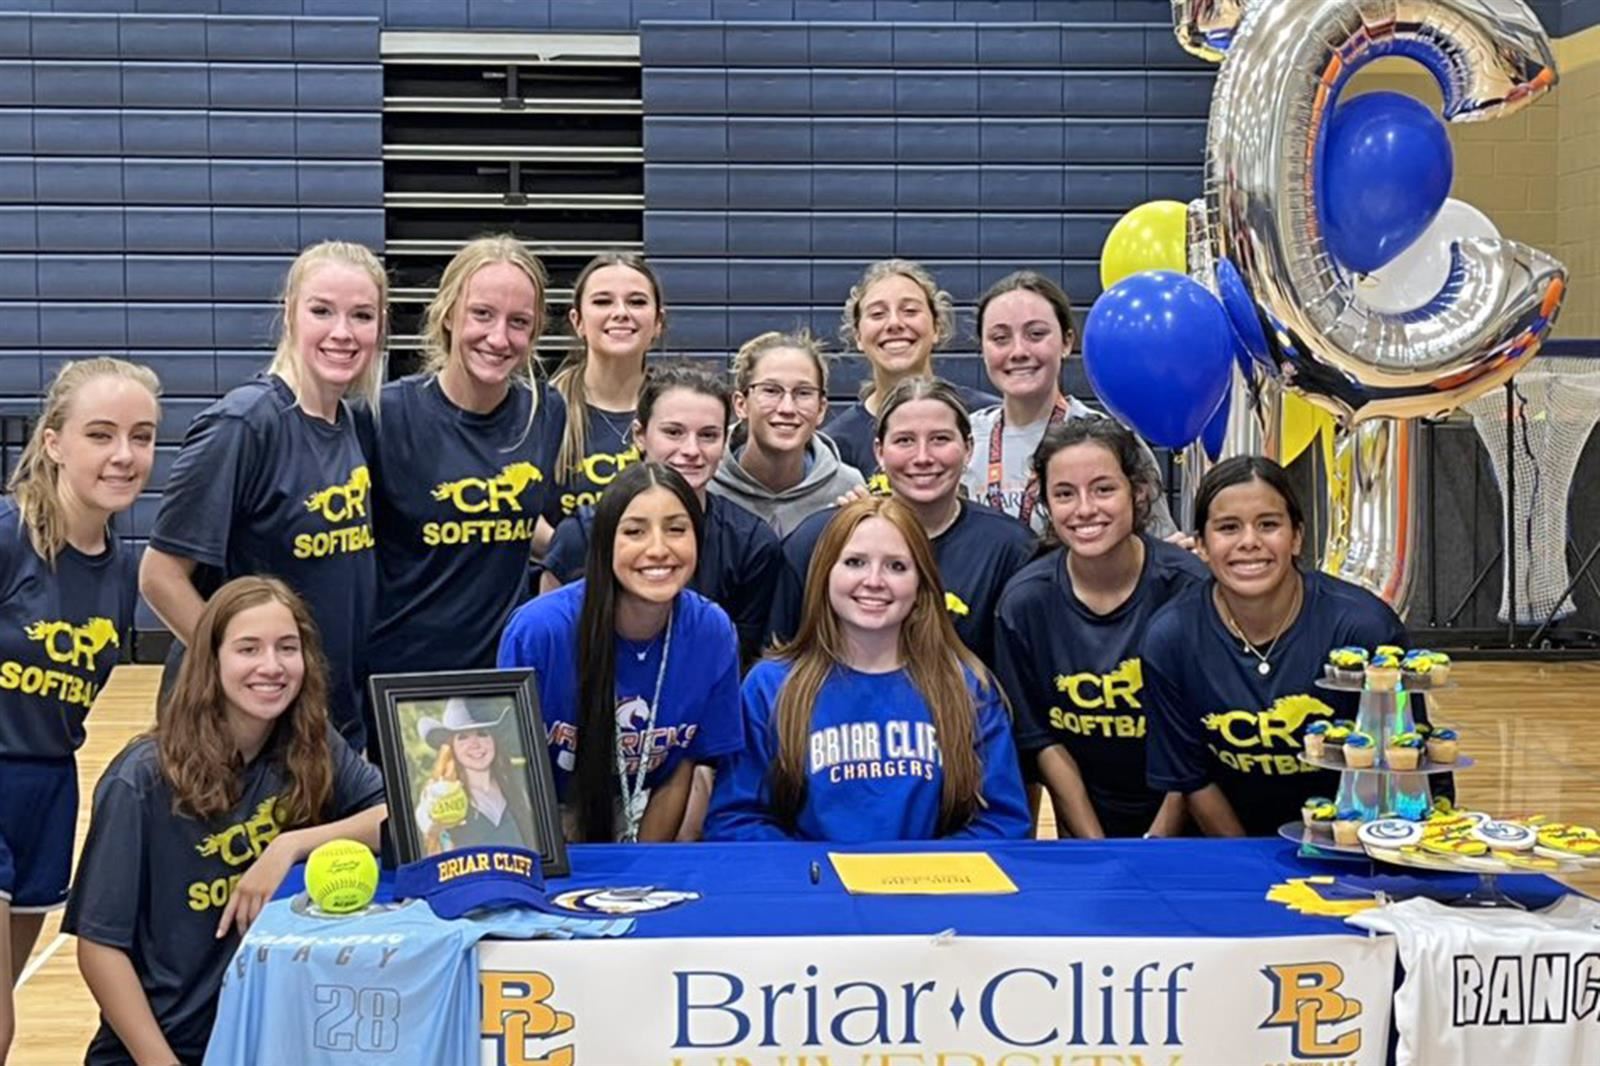 Cypress Ranch senior Alyson Greenlund, seated, signed a letter of intent to play softball at Briar Cliff University.